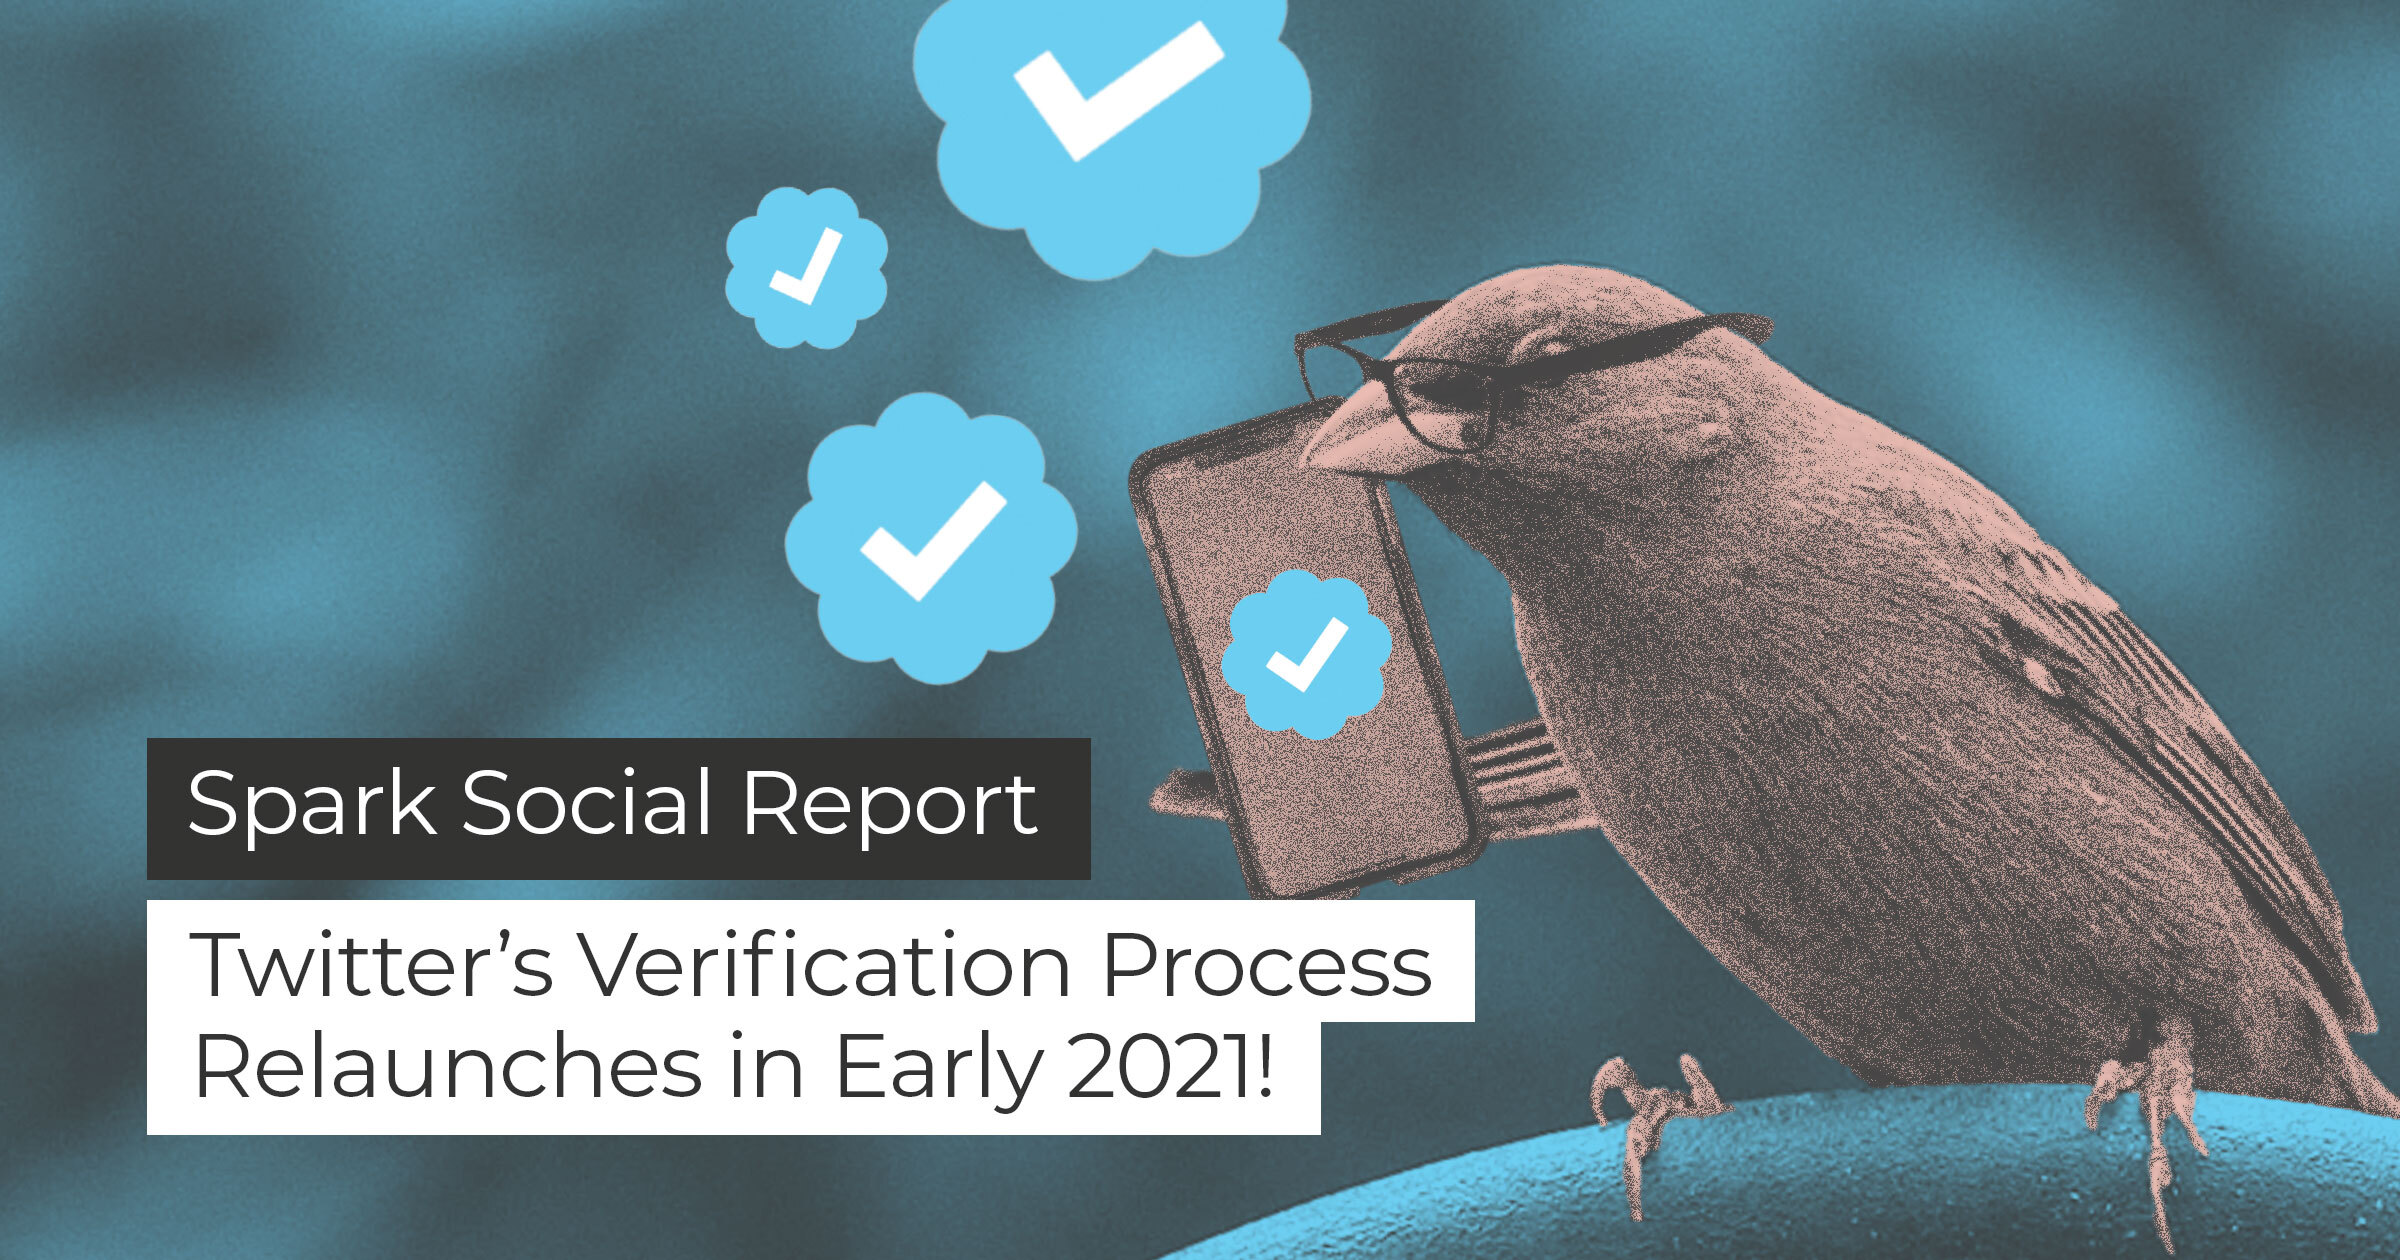 banner featuring bird holding smartphone with copy twitter's verification process relaunches in early 2021